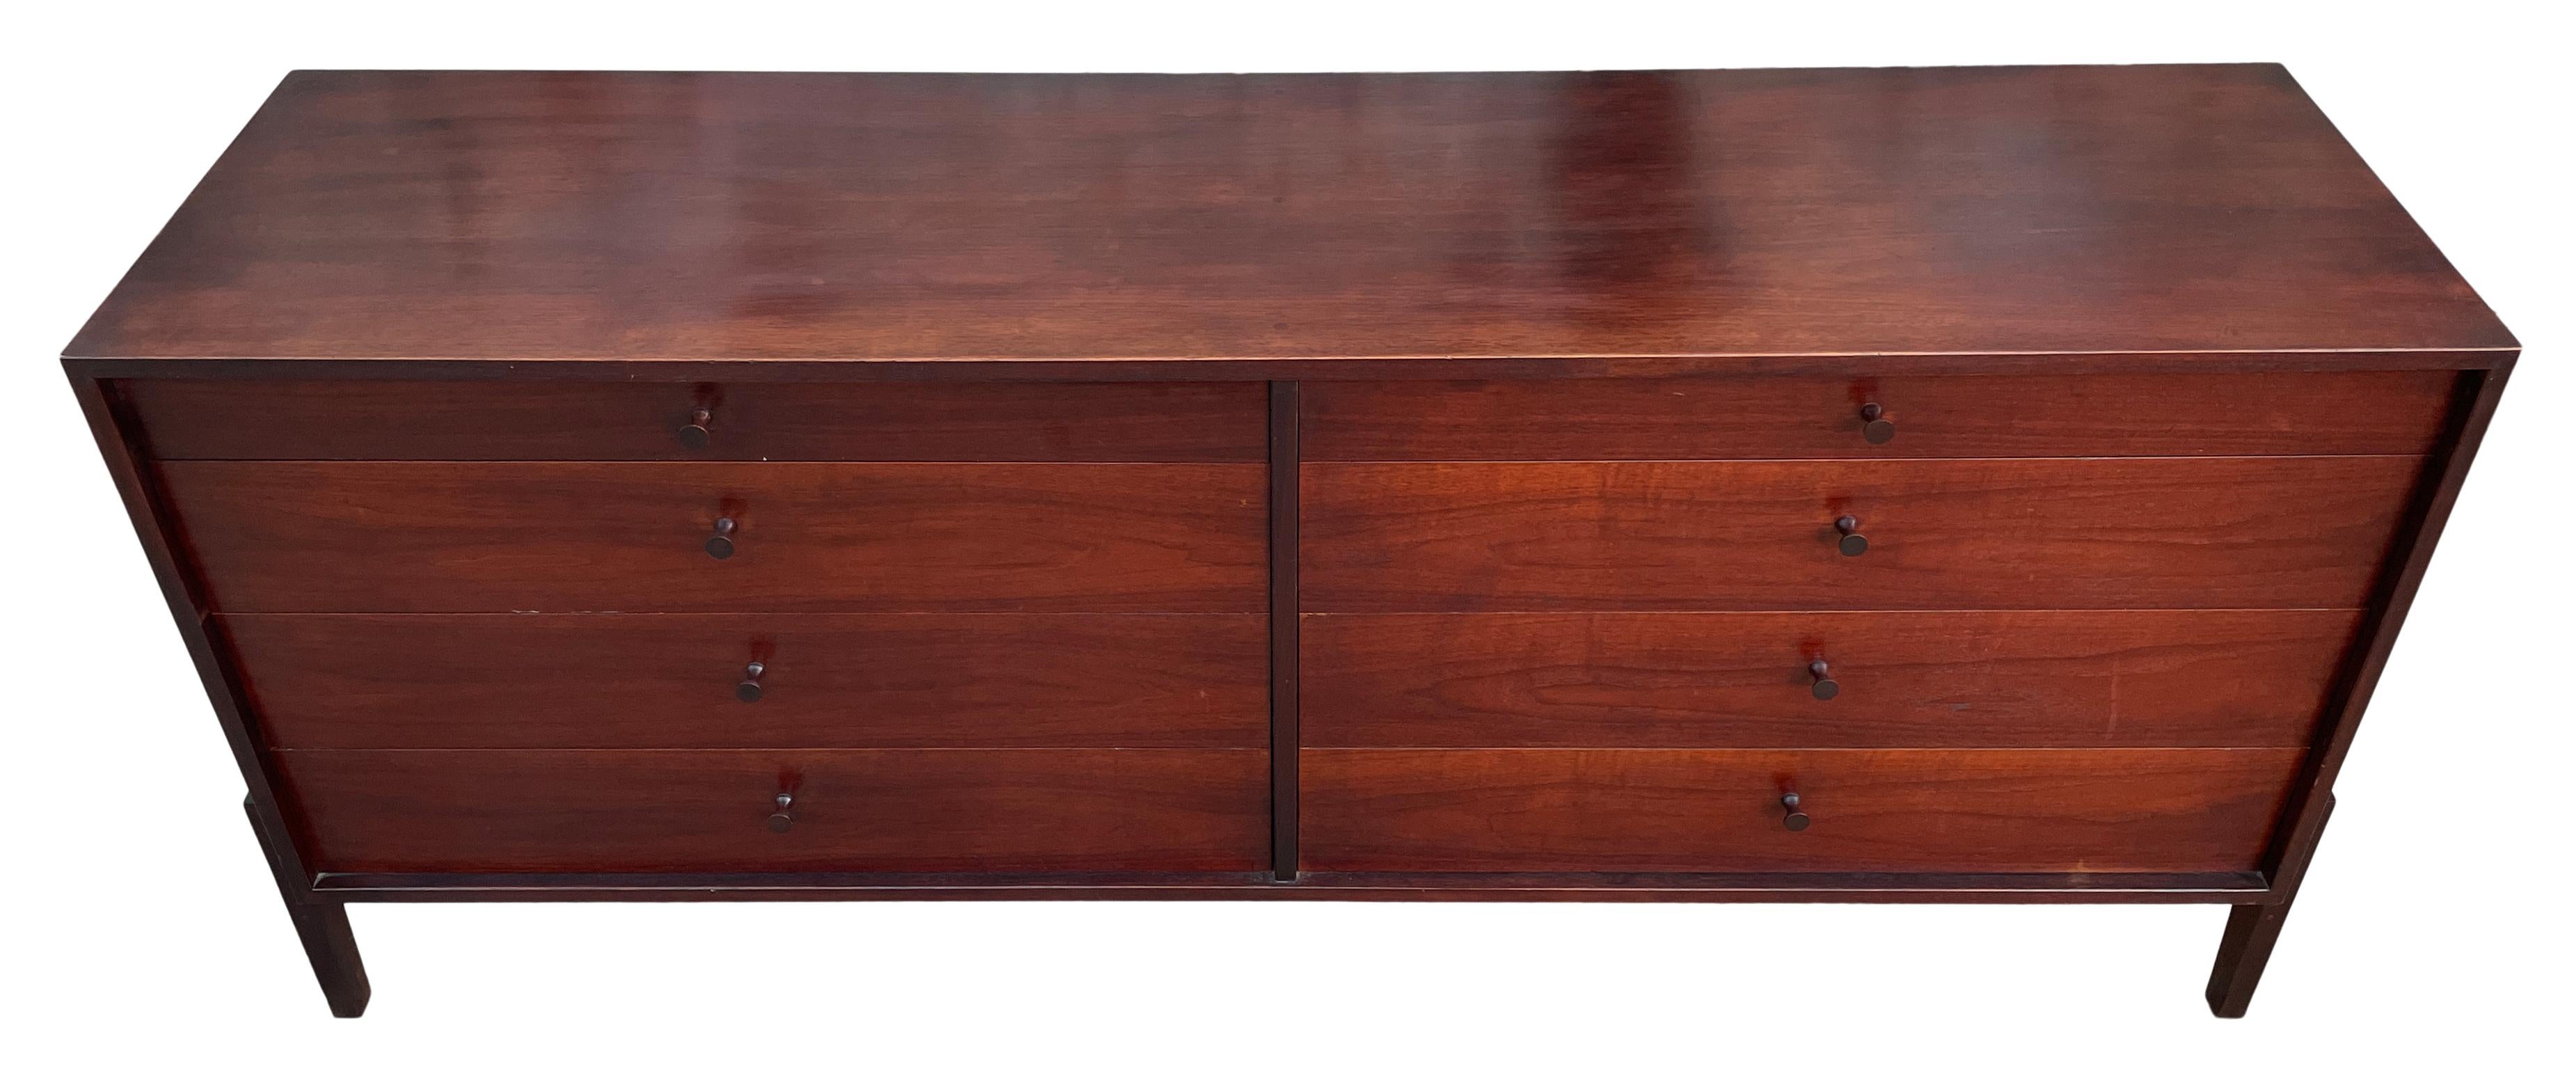 Unique Mid-Century Modern long walnut 8-drawer dresser credenza with all solid walnut knobs. Great design good vintage condition with stunning Patina. Has unique optional wood base. Rare dresser by Calvin Furniture Company designed by Kipp Stewart &